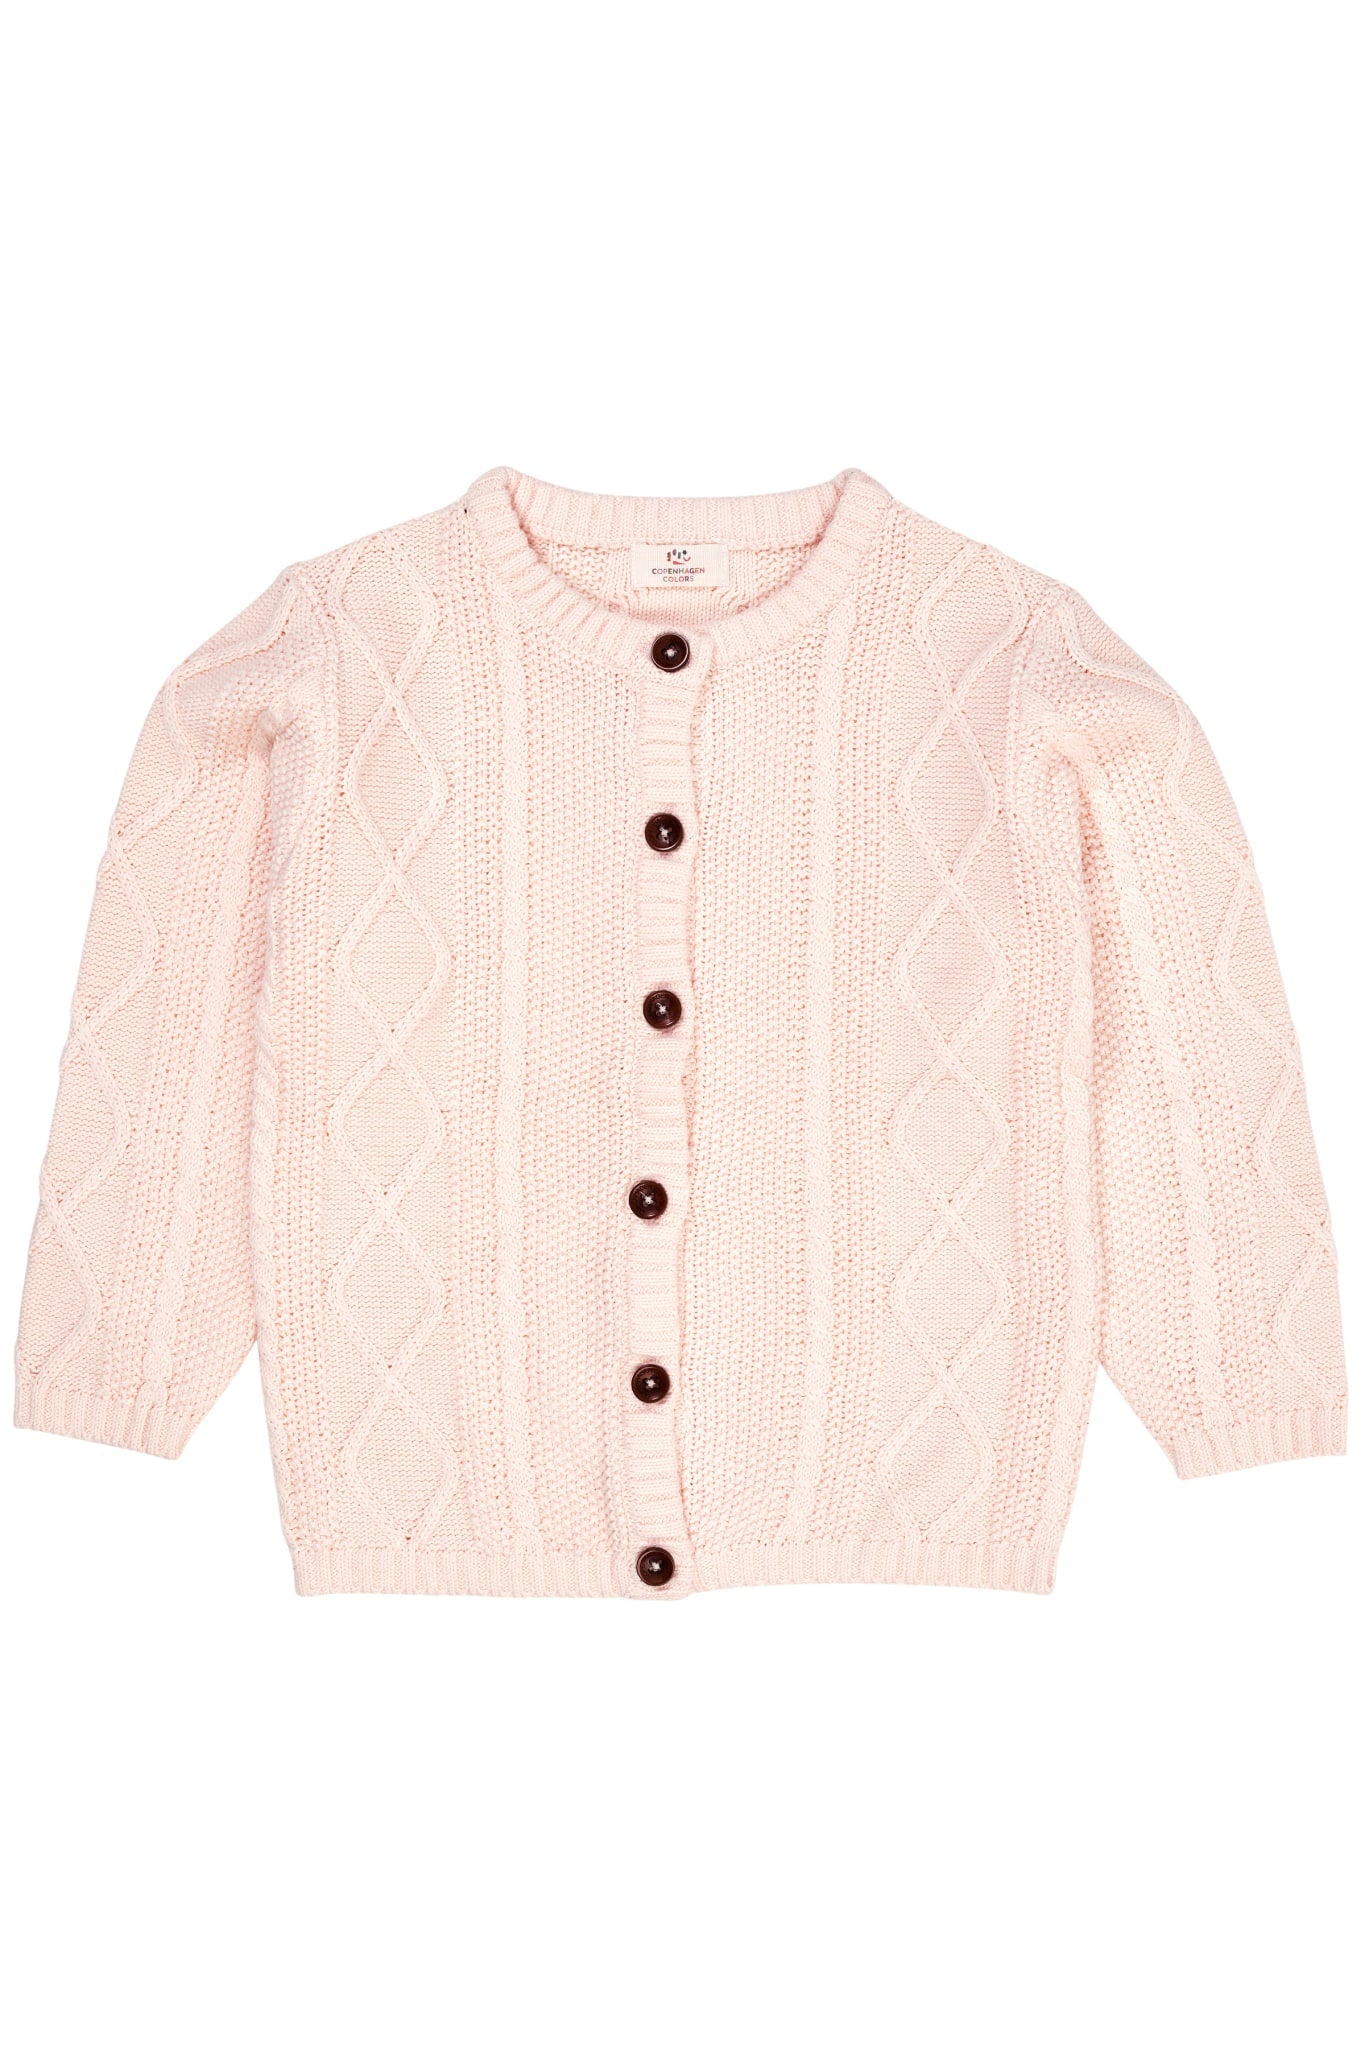 KNITTED CARDIGAN - SOFT PINK